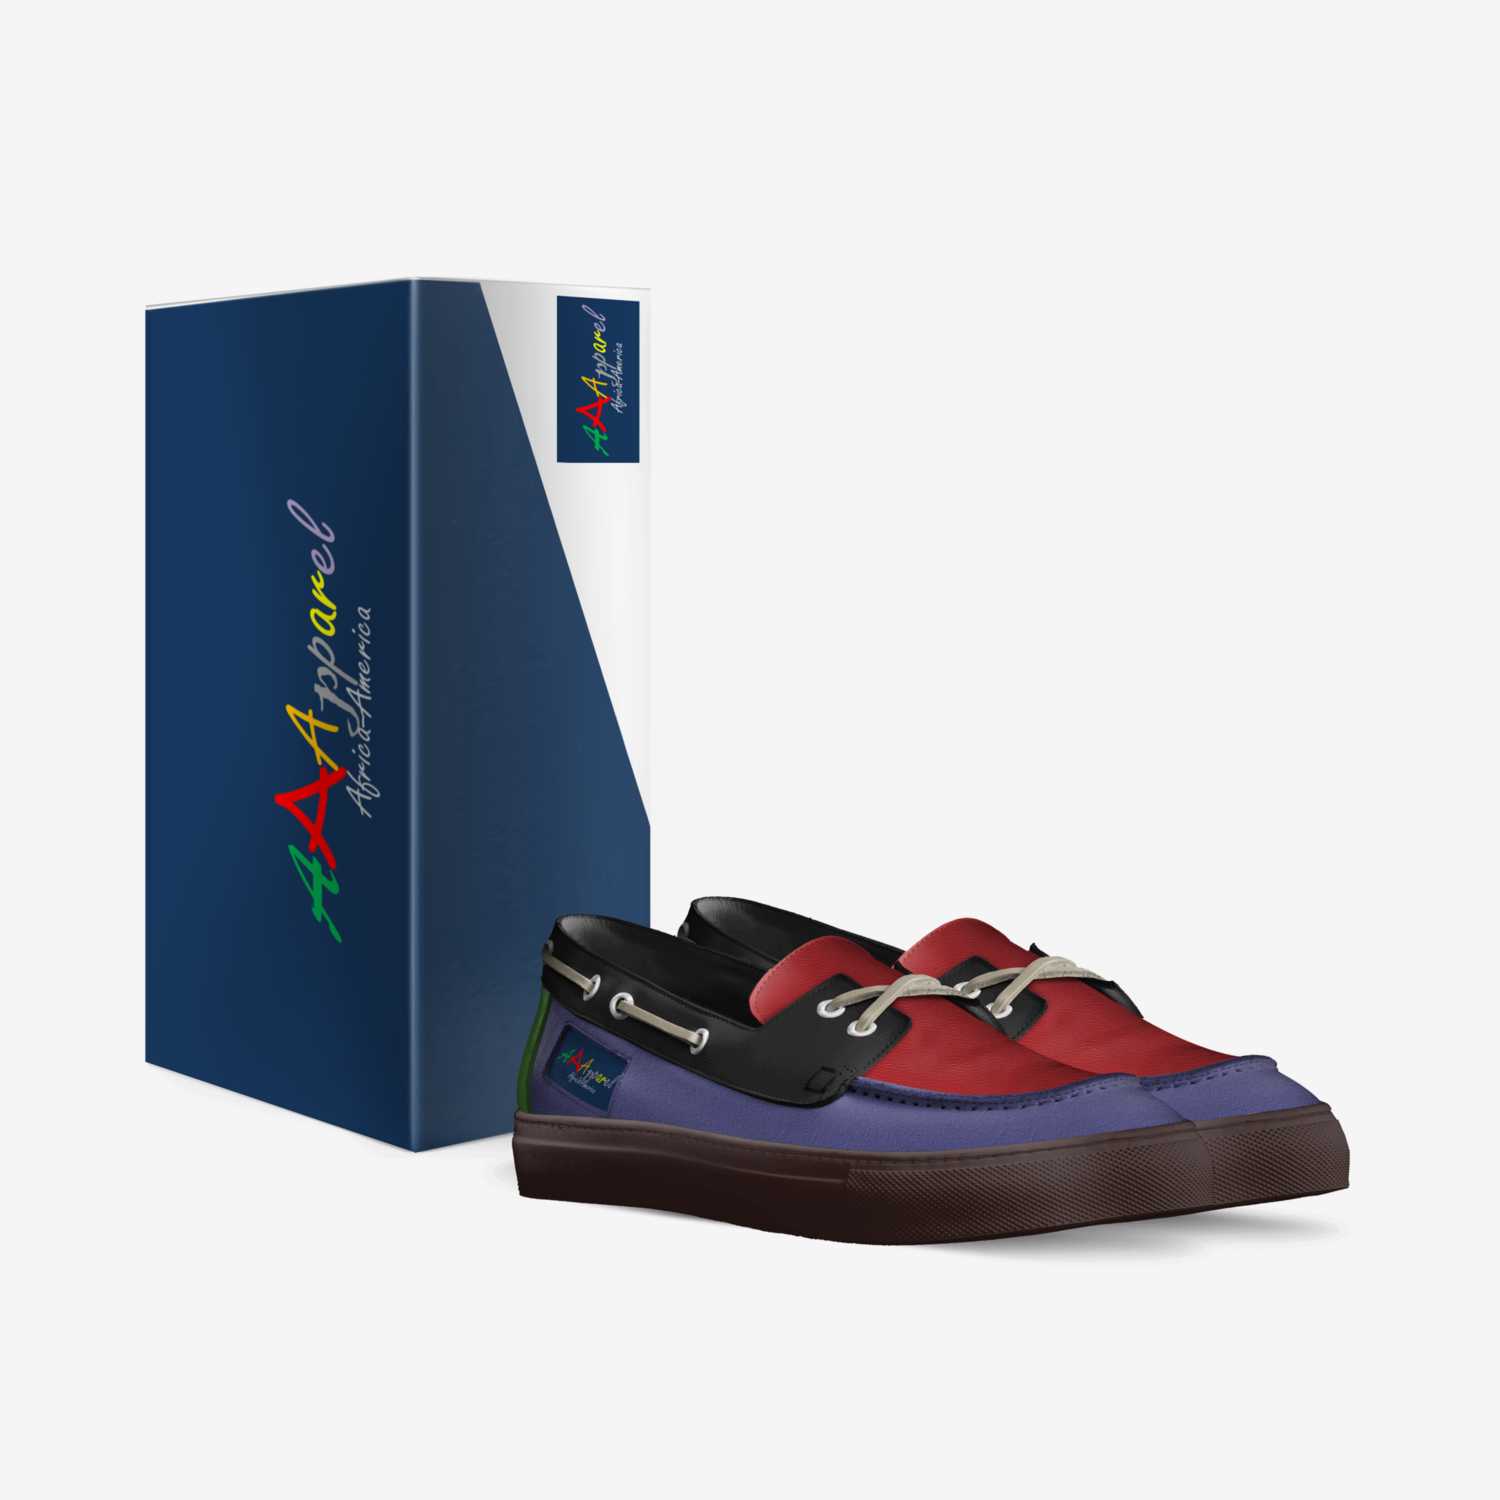 AAApparel II custom made in Italy shoes by Sammy Mclain | Box view